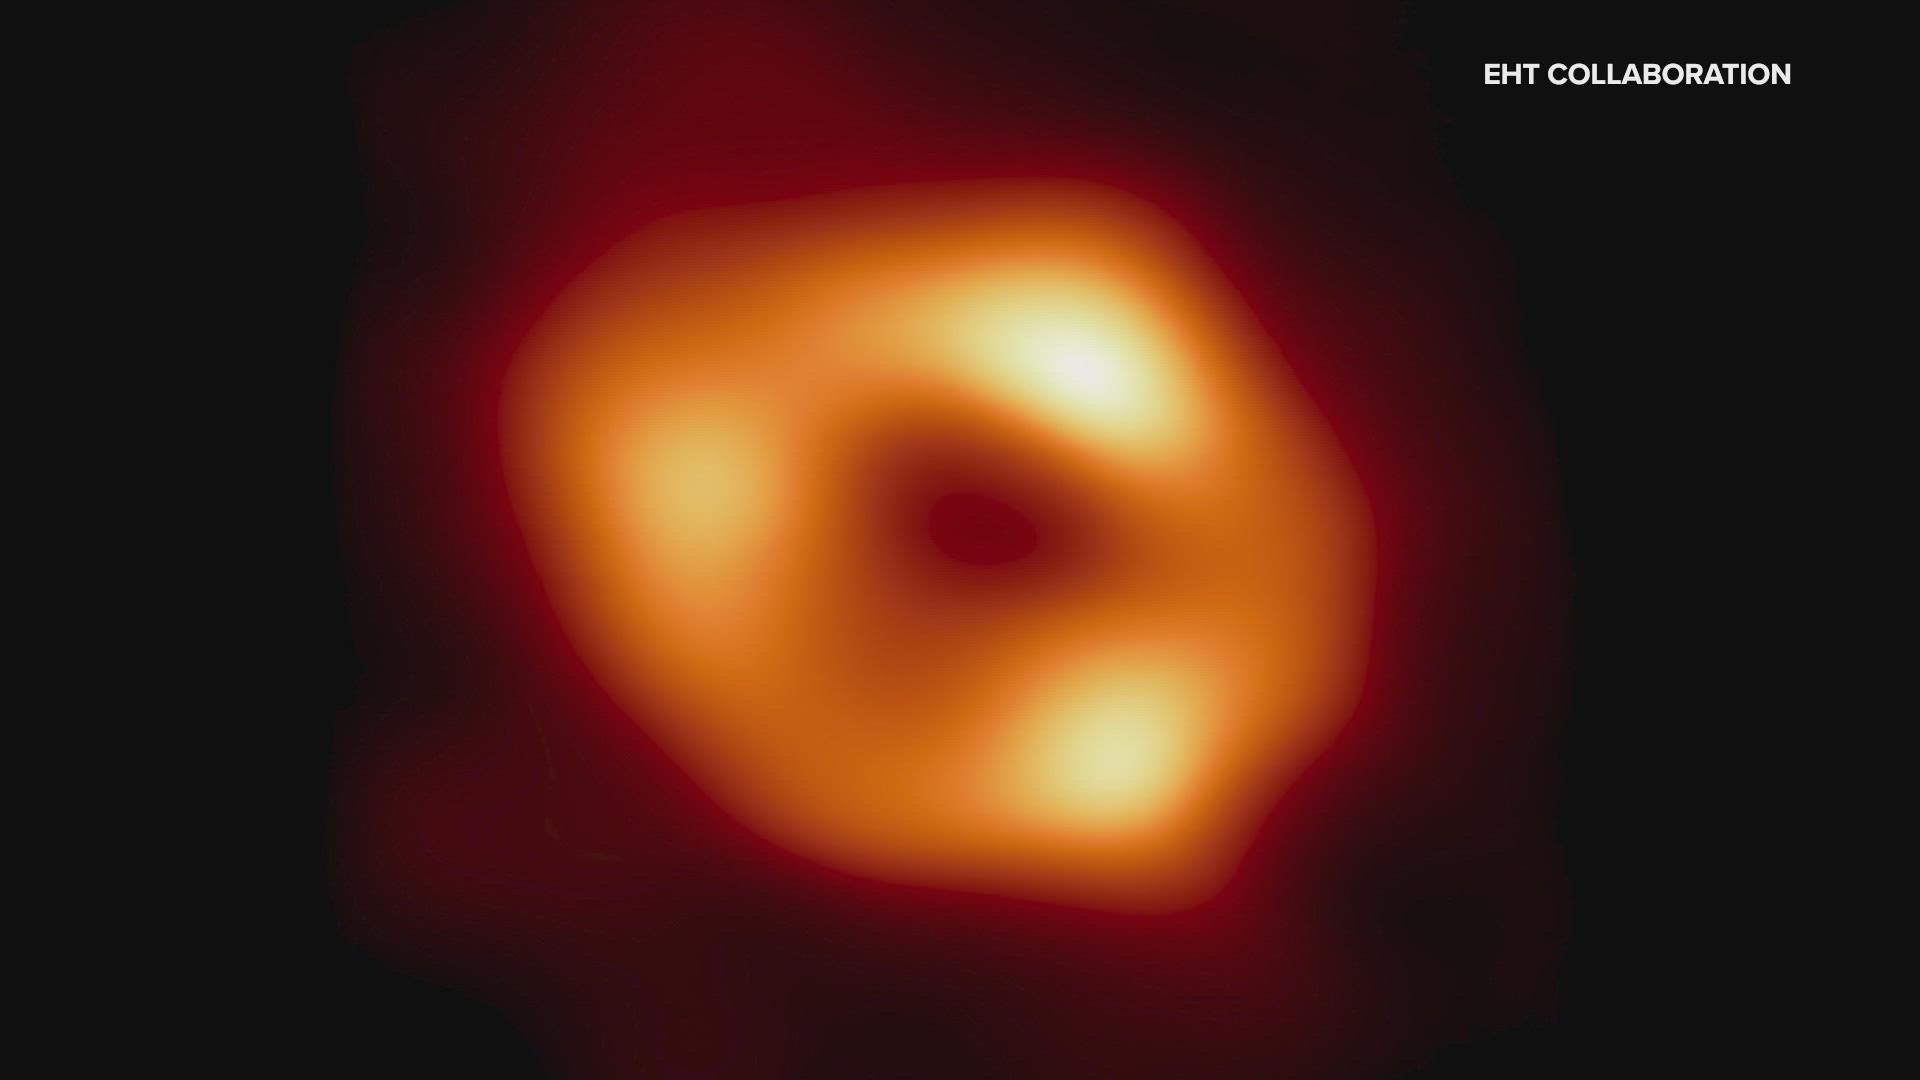 The world's first image of a chaotic supermassive black hole at the center of our Milky Way galaxy was unveiled on Thursday, May 12, 2022.